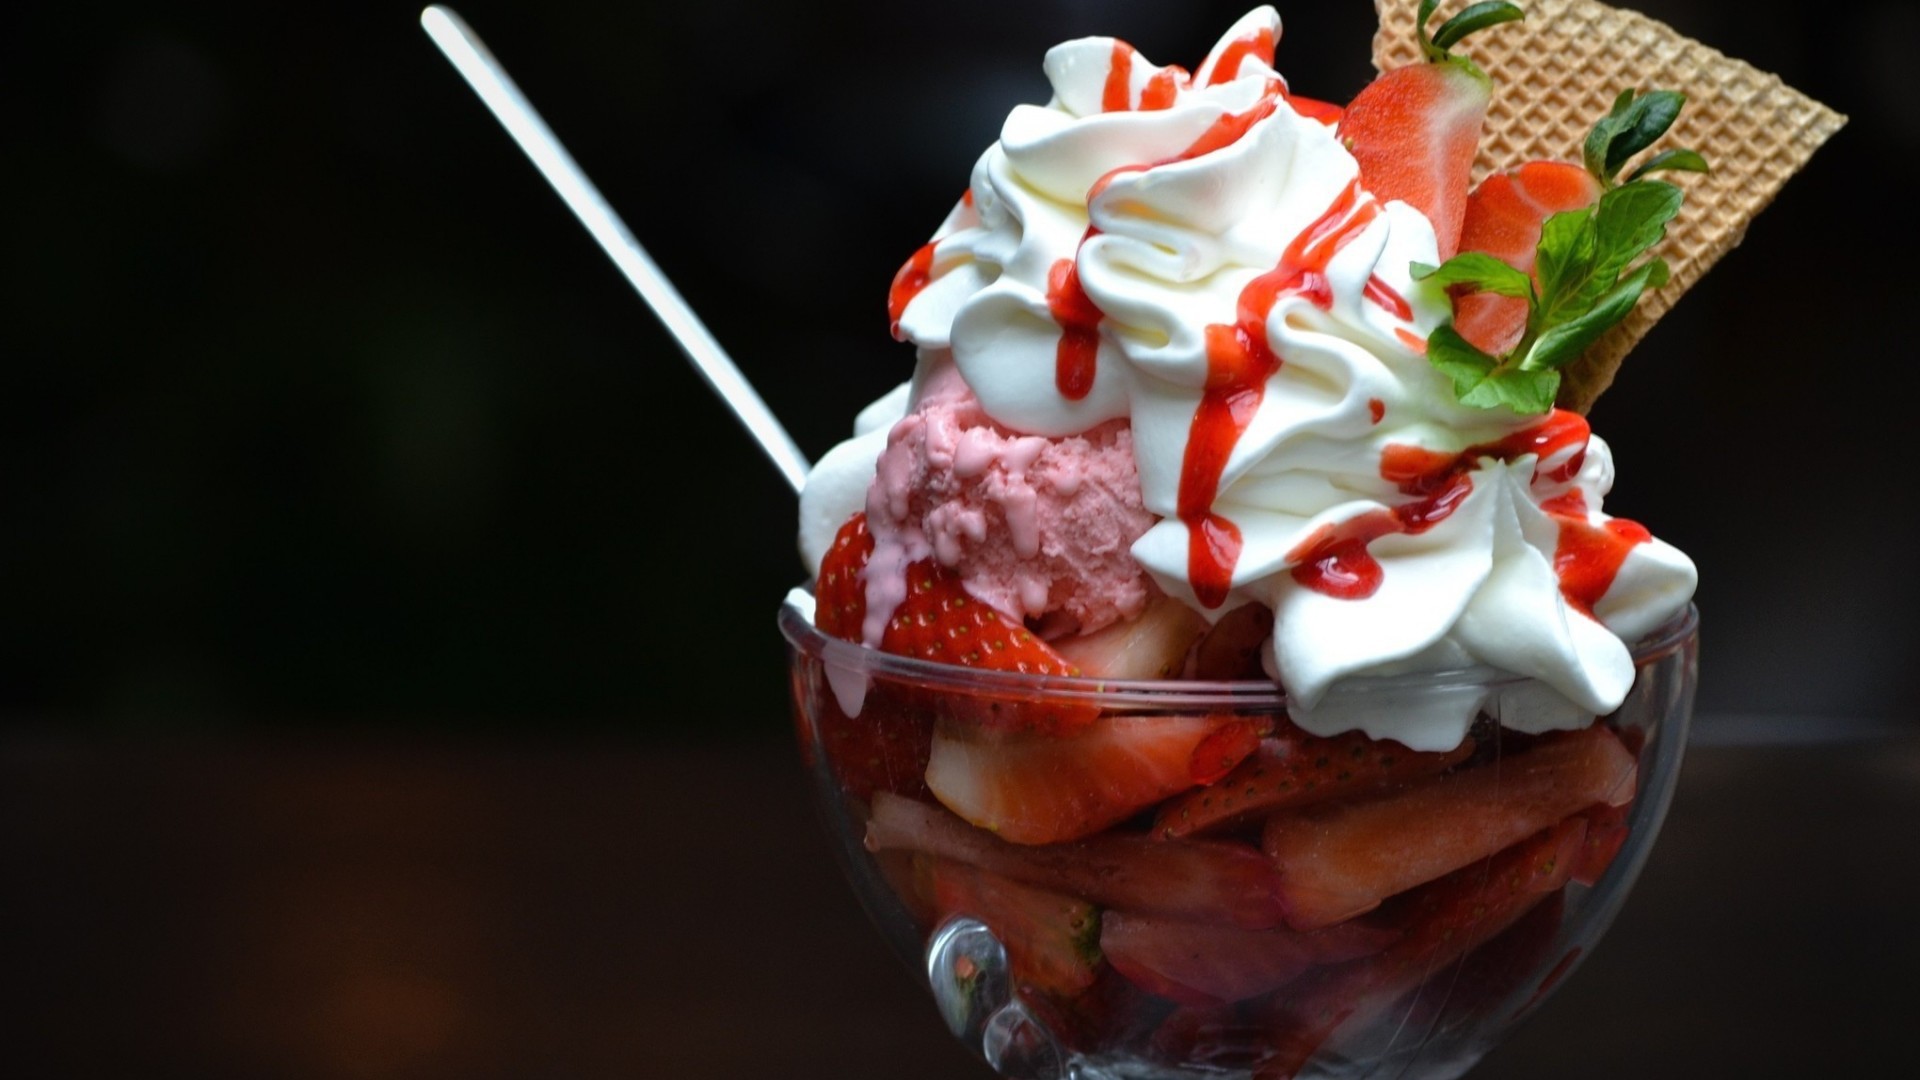 Ice cream with strawberries wallpapers and images ...